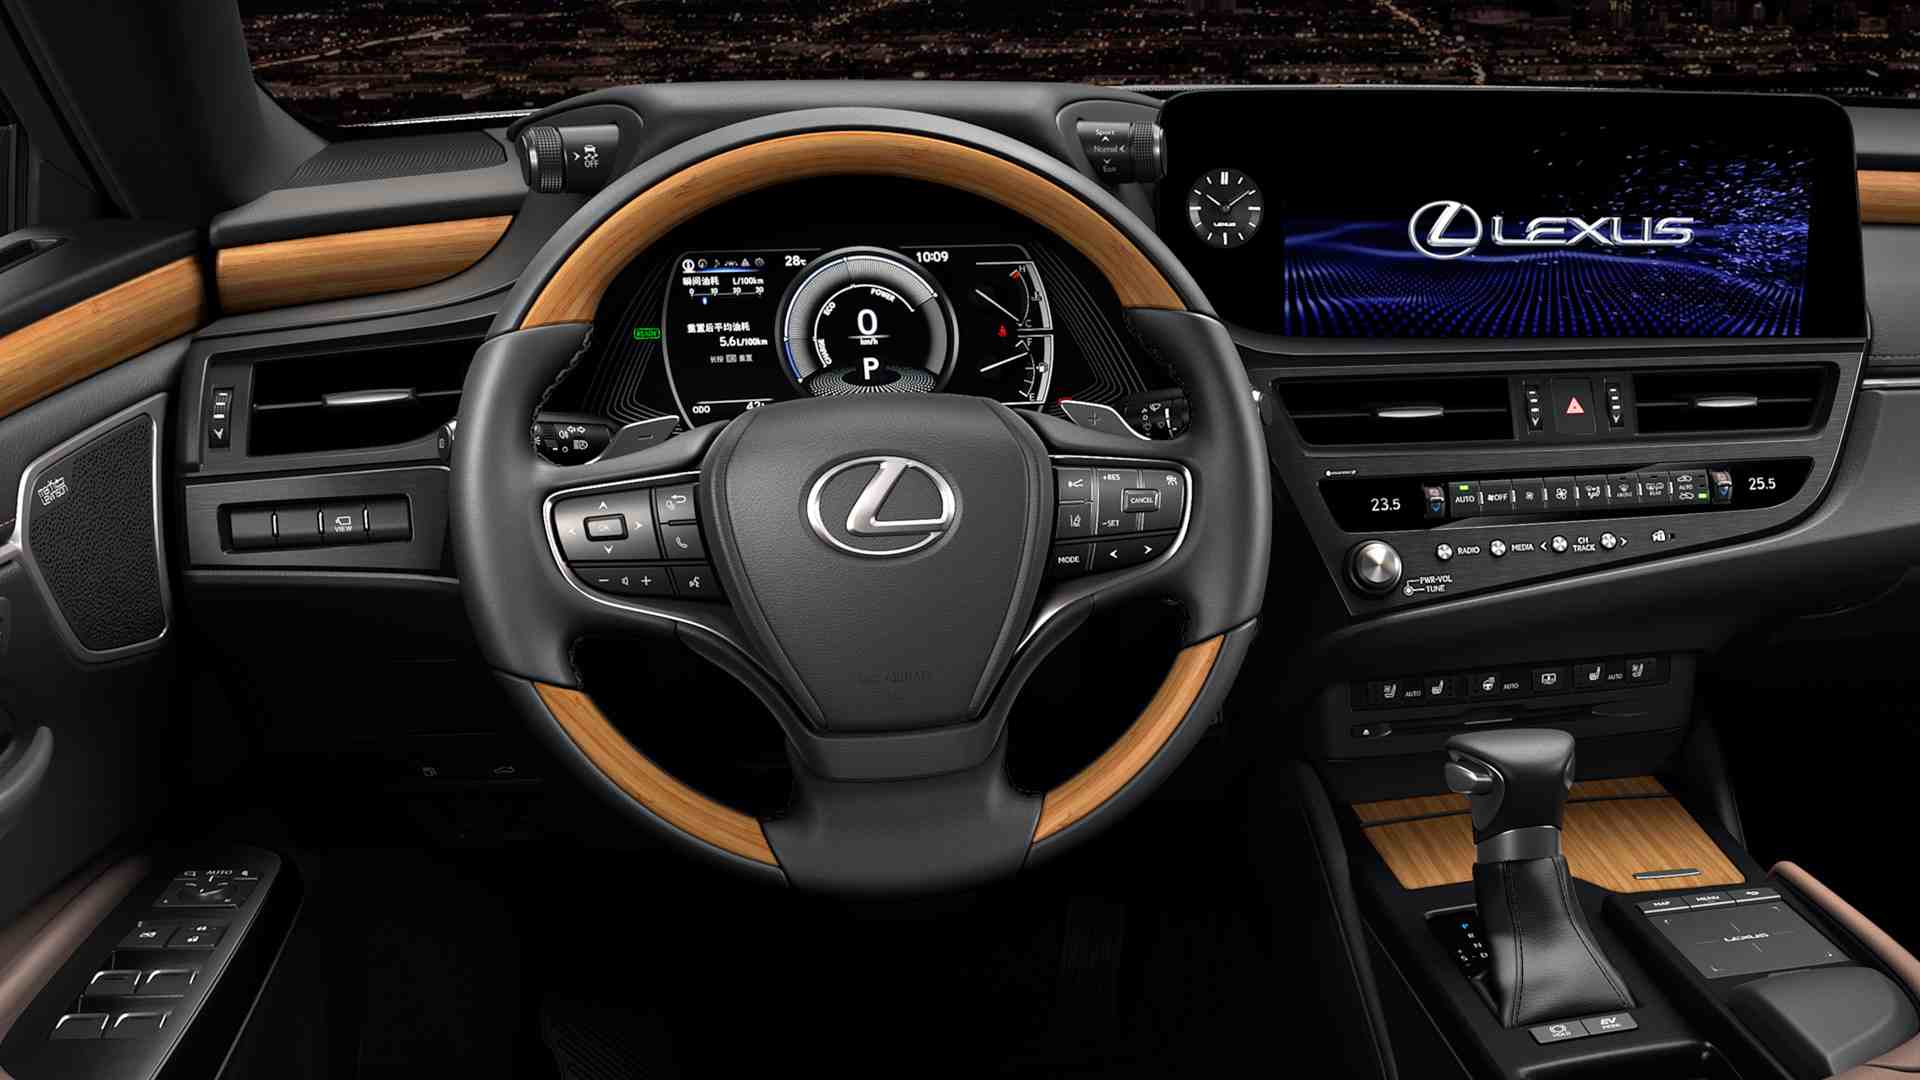 Lexus Es Facelift Debuts At Auto Shanghai 2021 With Styling Tweaks And Feature Updates Technology News Firstpost